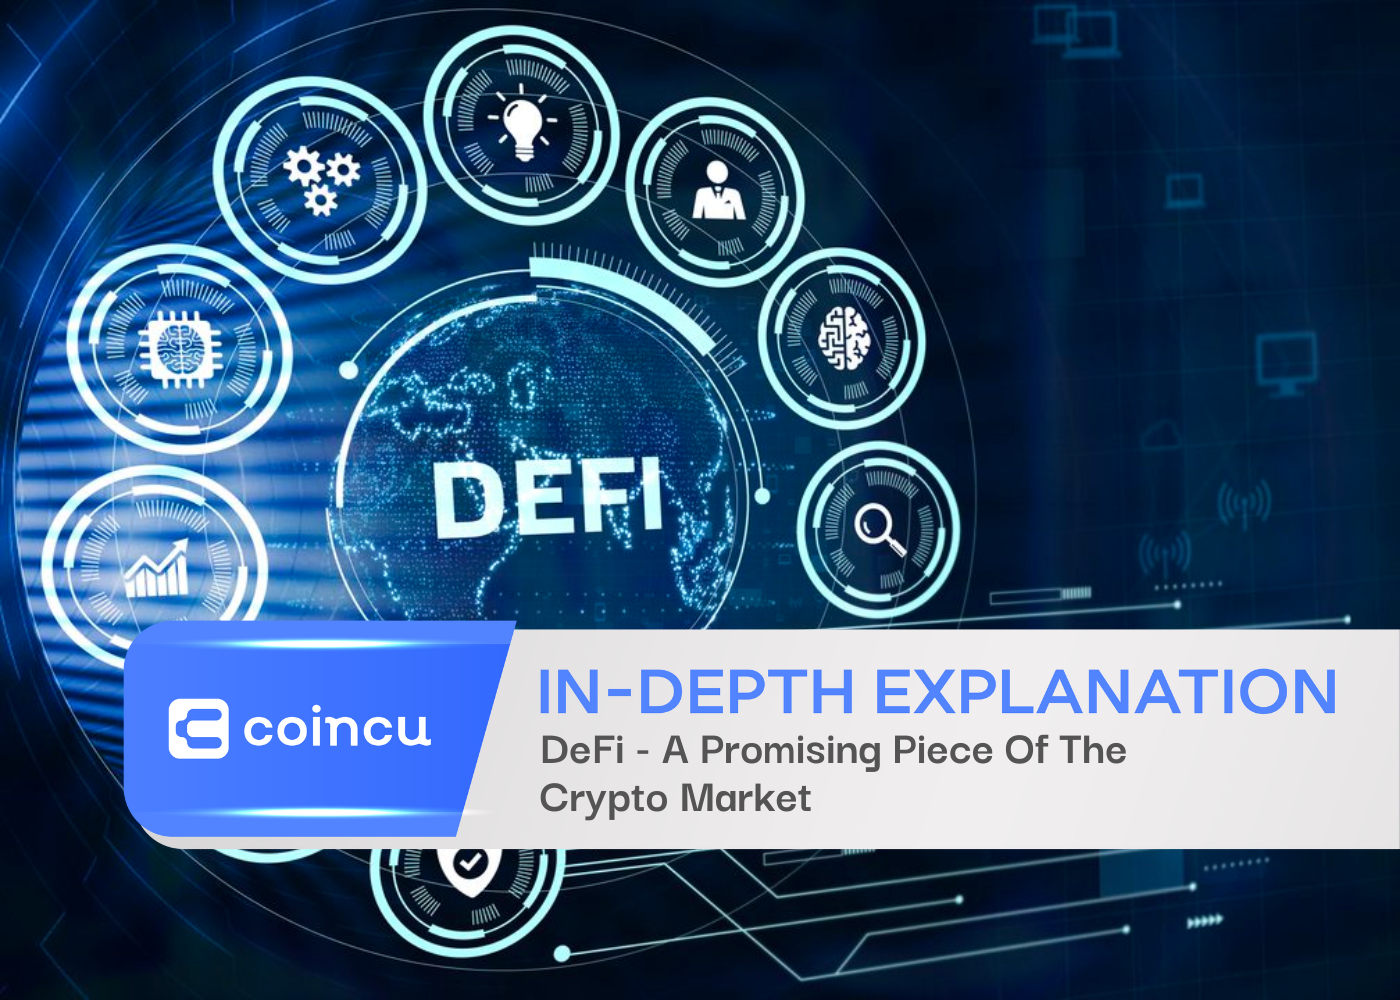 DeFi - A Promising Piece Of The Crypto Market